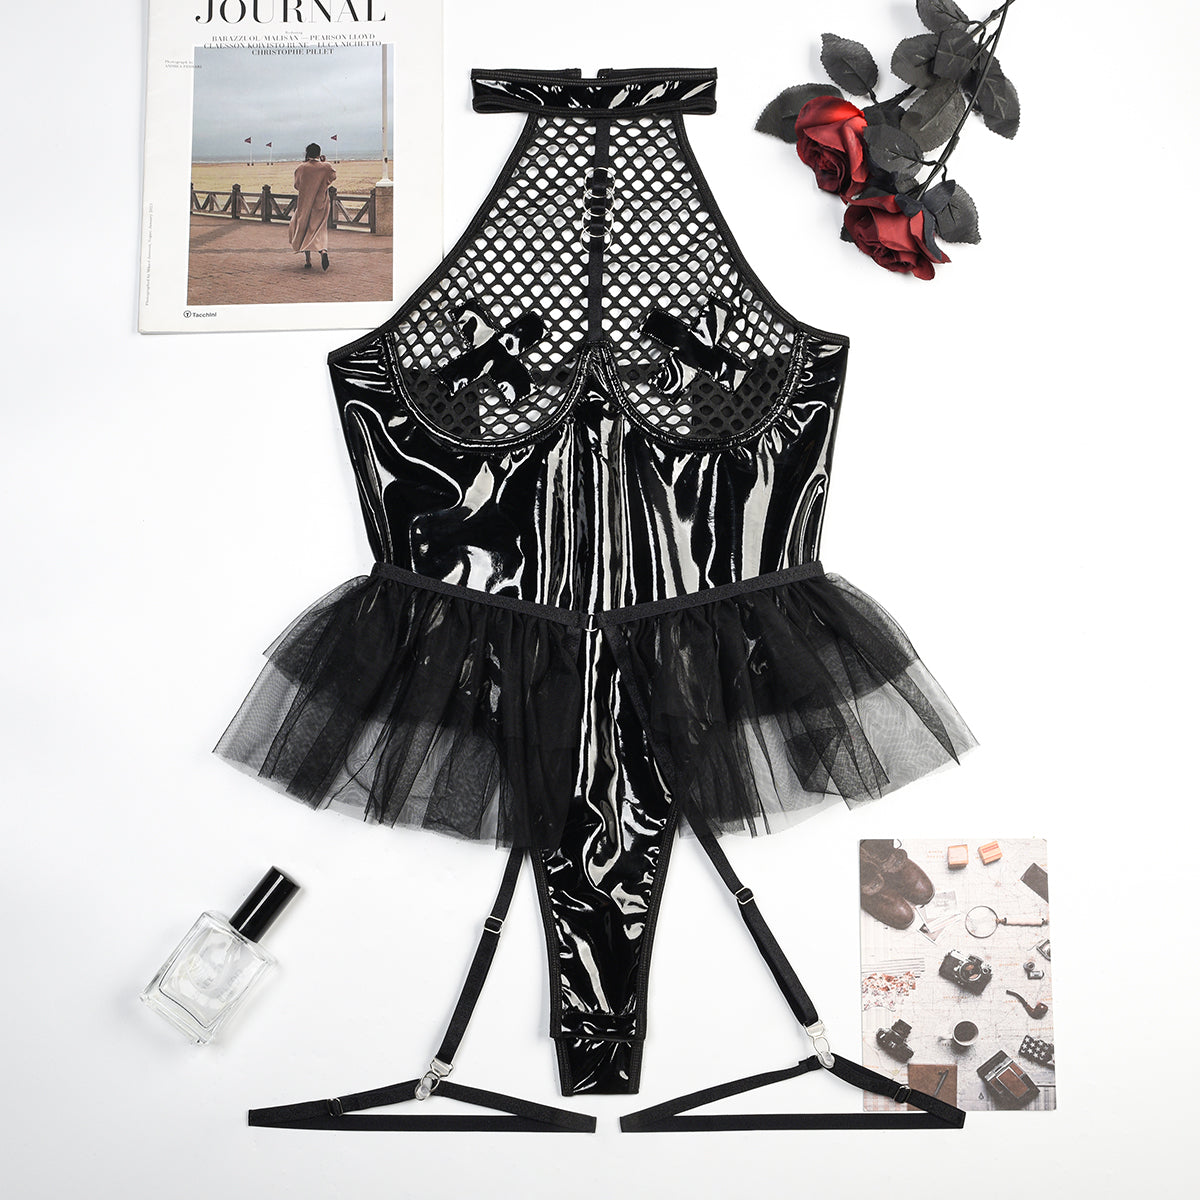 Lacquerux Temptress: provocative teddy with a ruffle garter belt